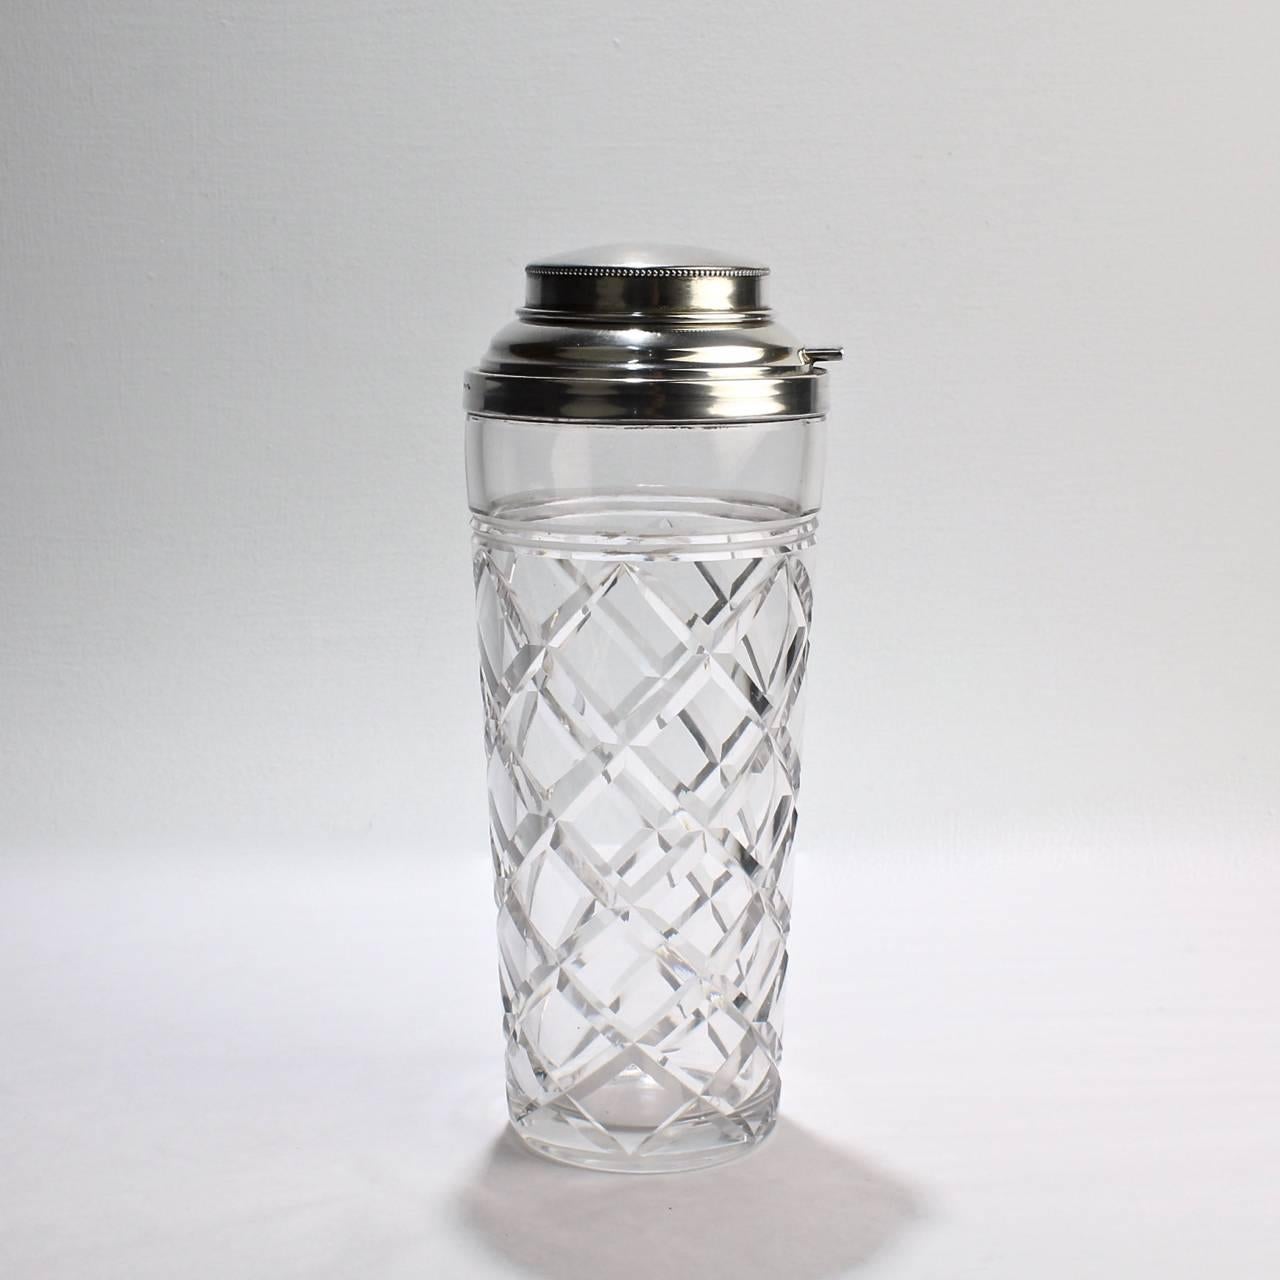 A good American cut-glass and sterling silver Art Deco cocktail shaker.

With an open side spout for pouring (to be covered with the thumb when shaking).

Lid and mount both marked for Webster and Co. and sterling silver. 

Height: ca. 9 1/2